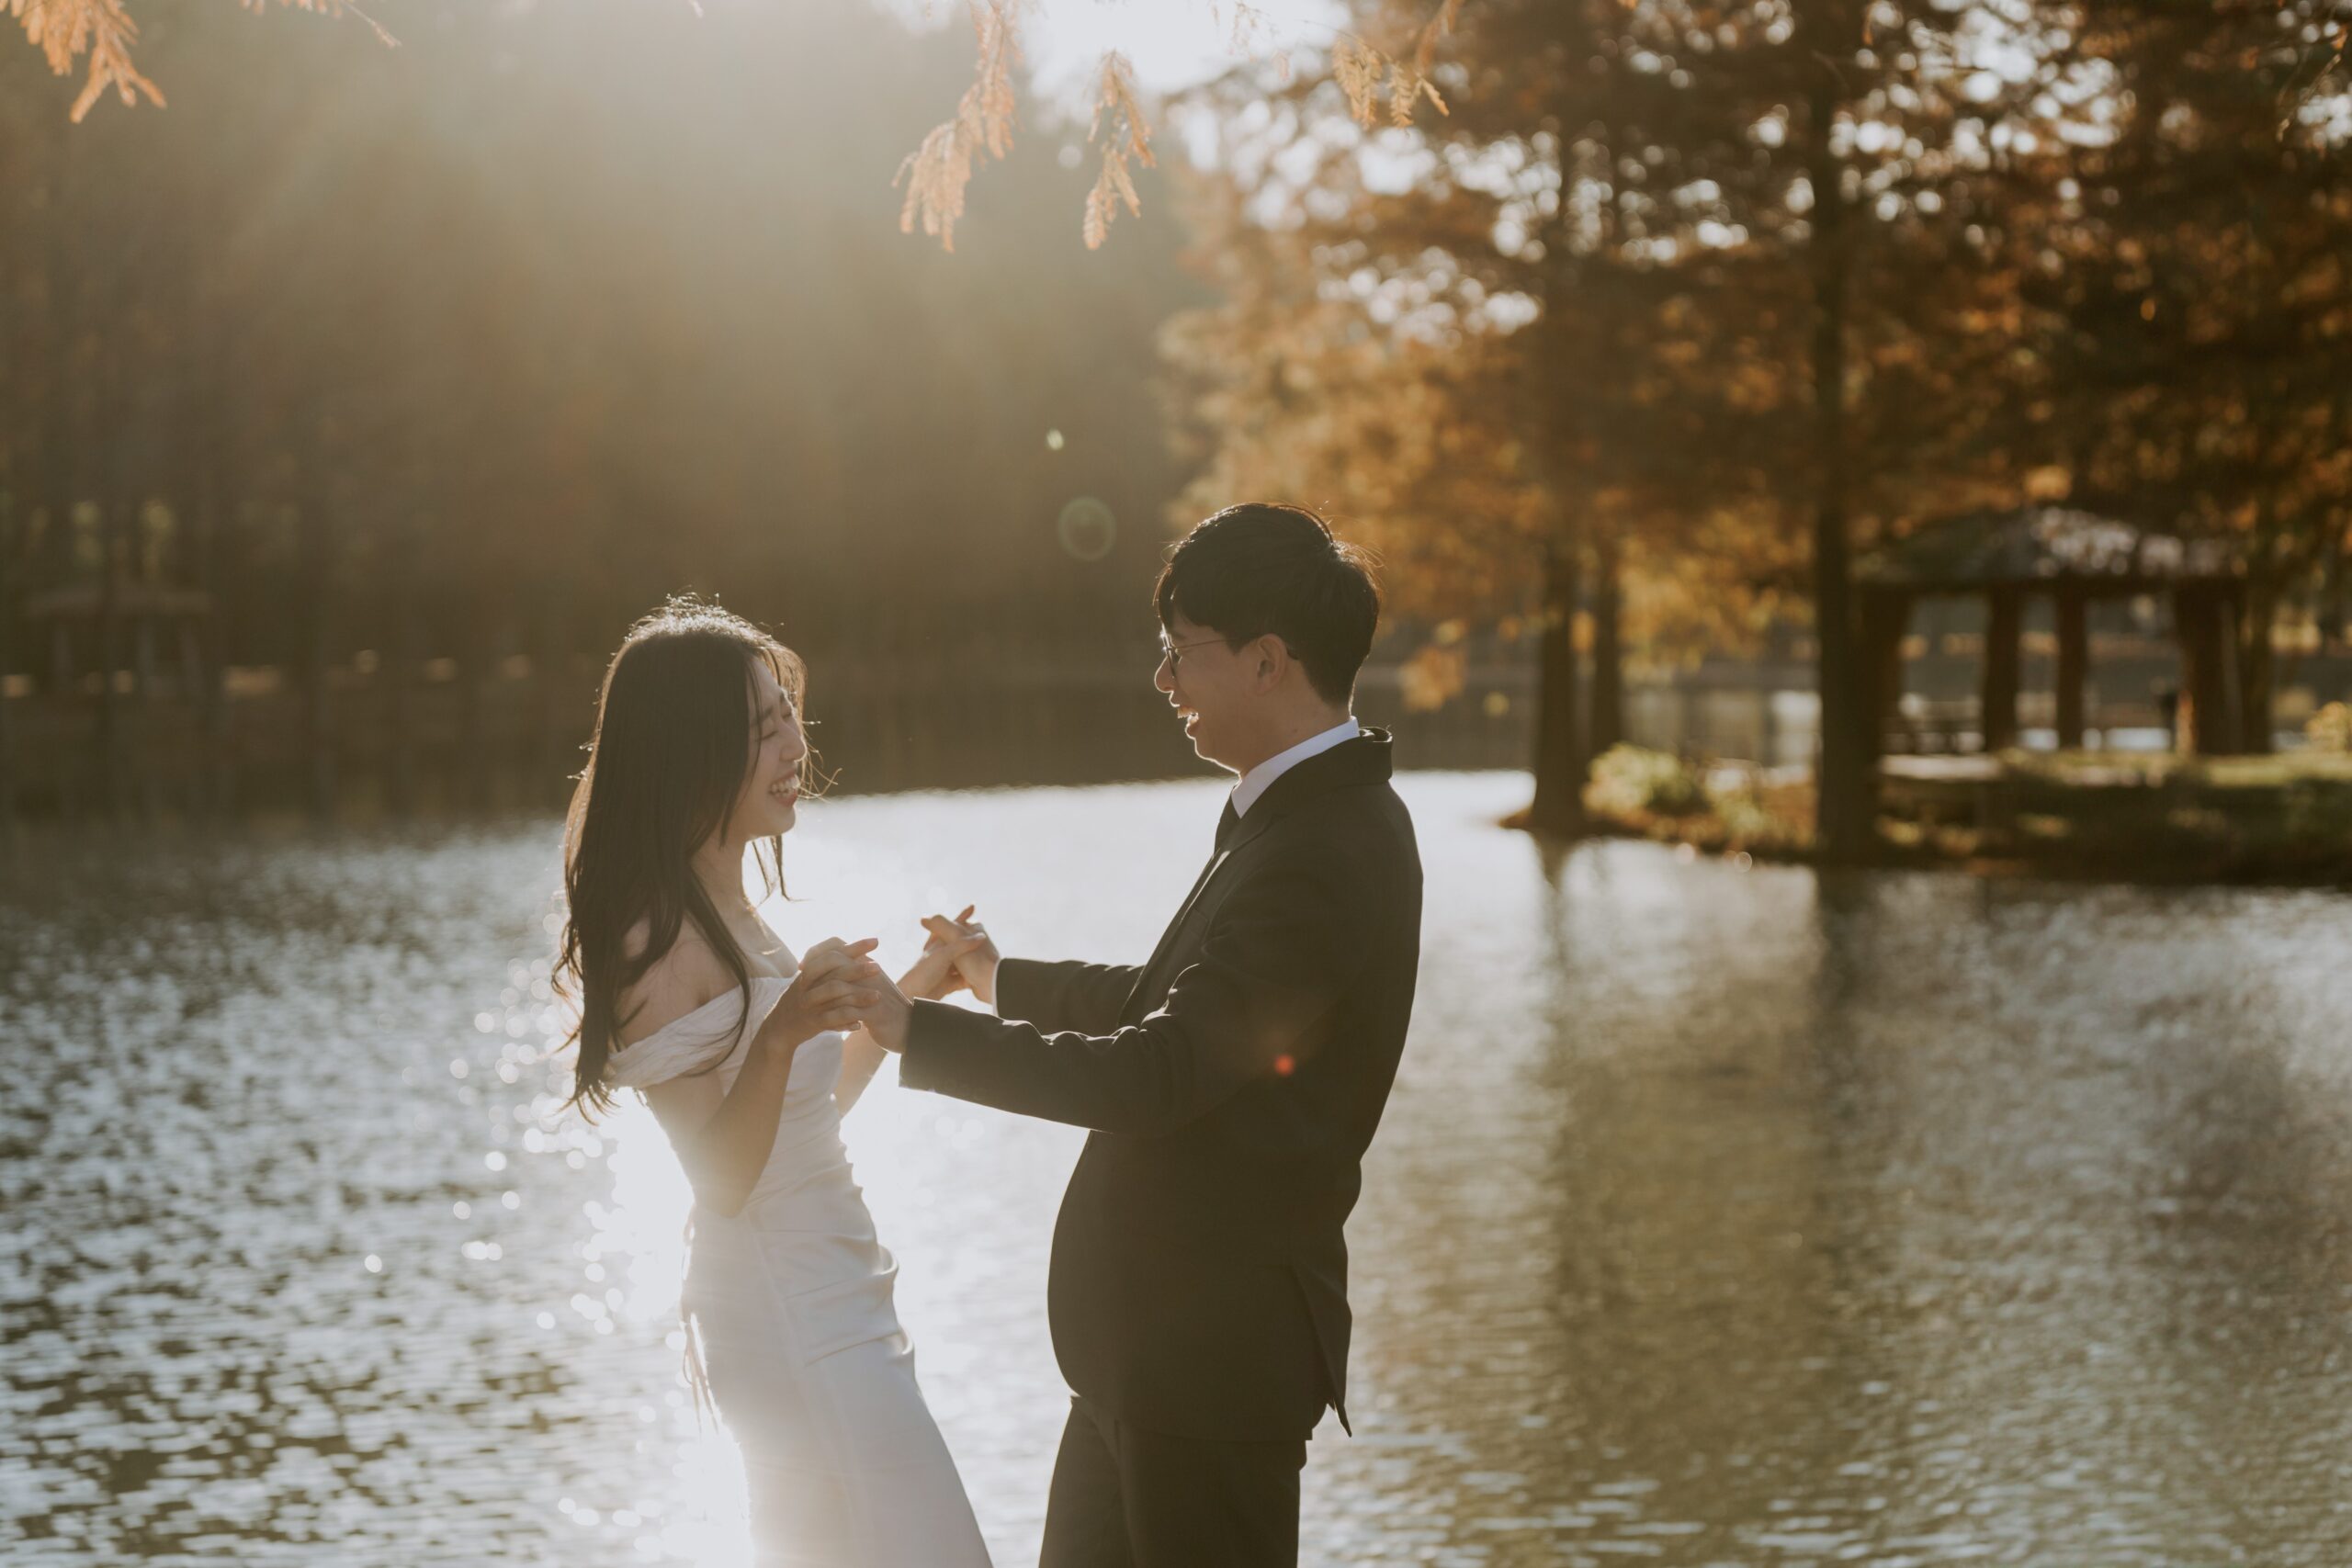 A bride and groom standing in front of a pond.